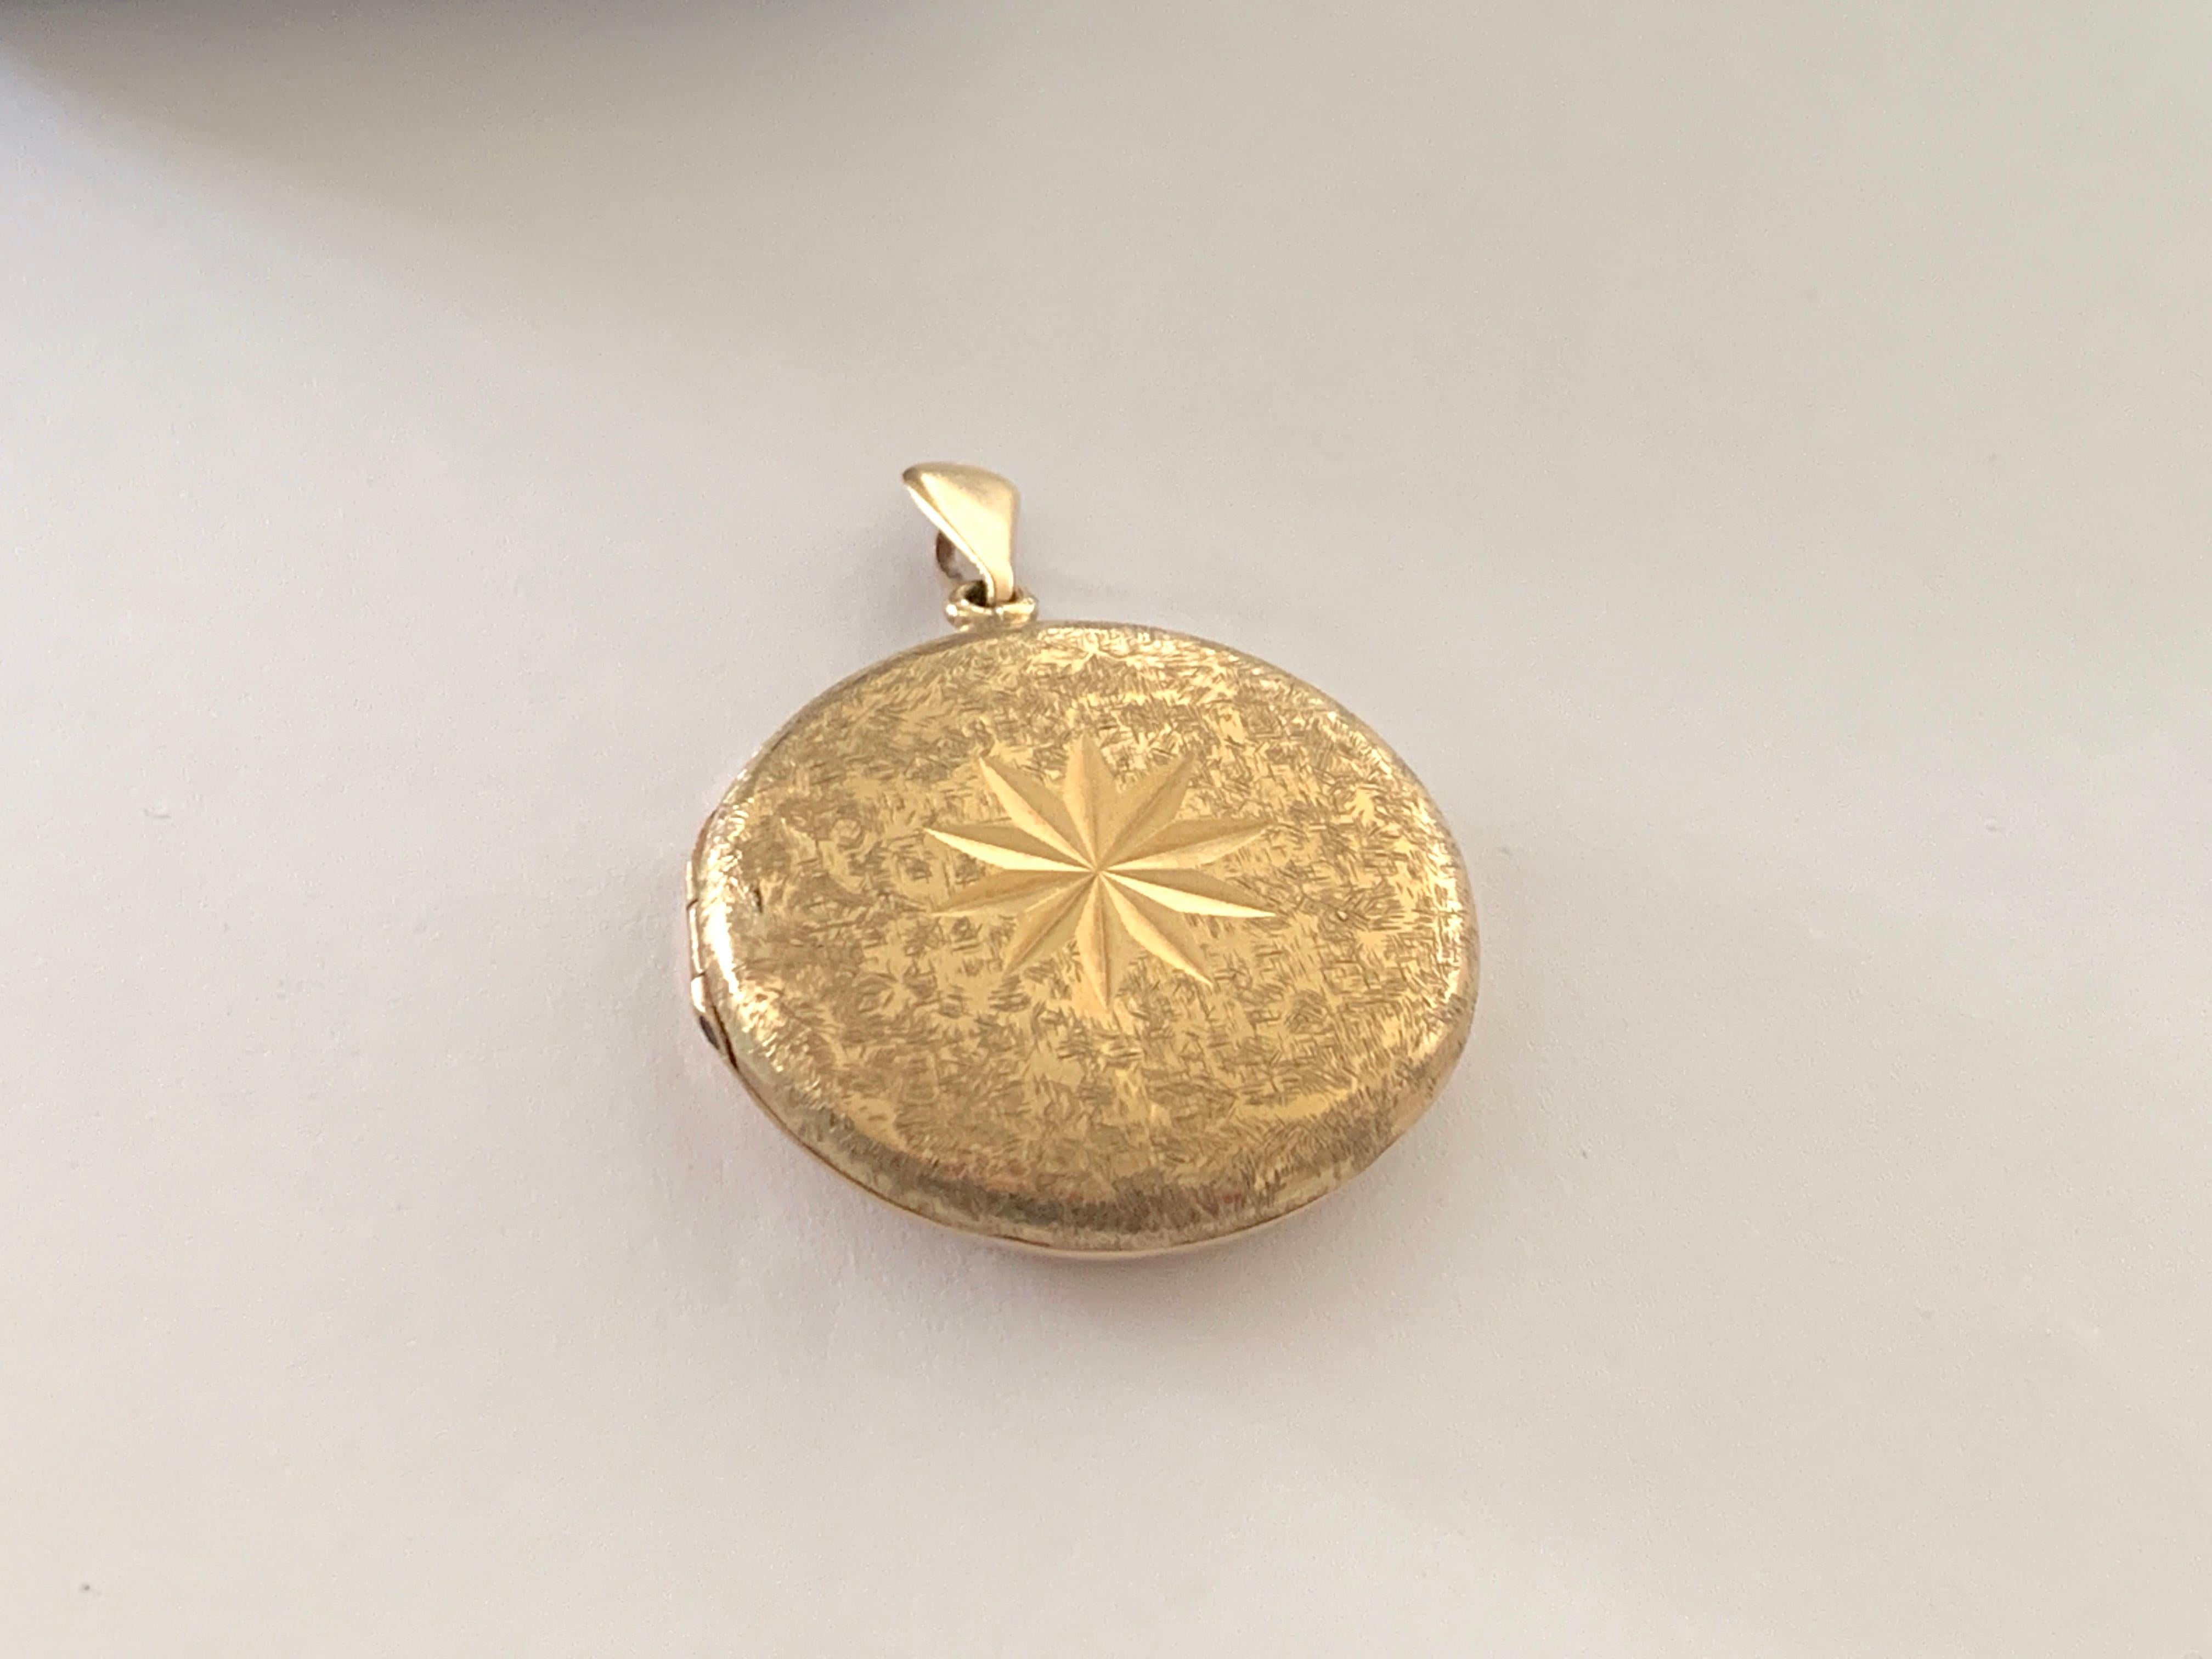 9ct 375 Gold Vintage 
pocket watch shaped Locket
with central starburst and brutalist cross hatch etching
Full British hallmark on reverse - dated 1965
Size 3cm diameter
Weight 10 grams
opens & closes securely
snaps shut sound !